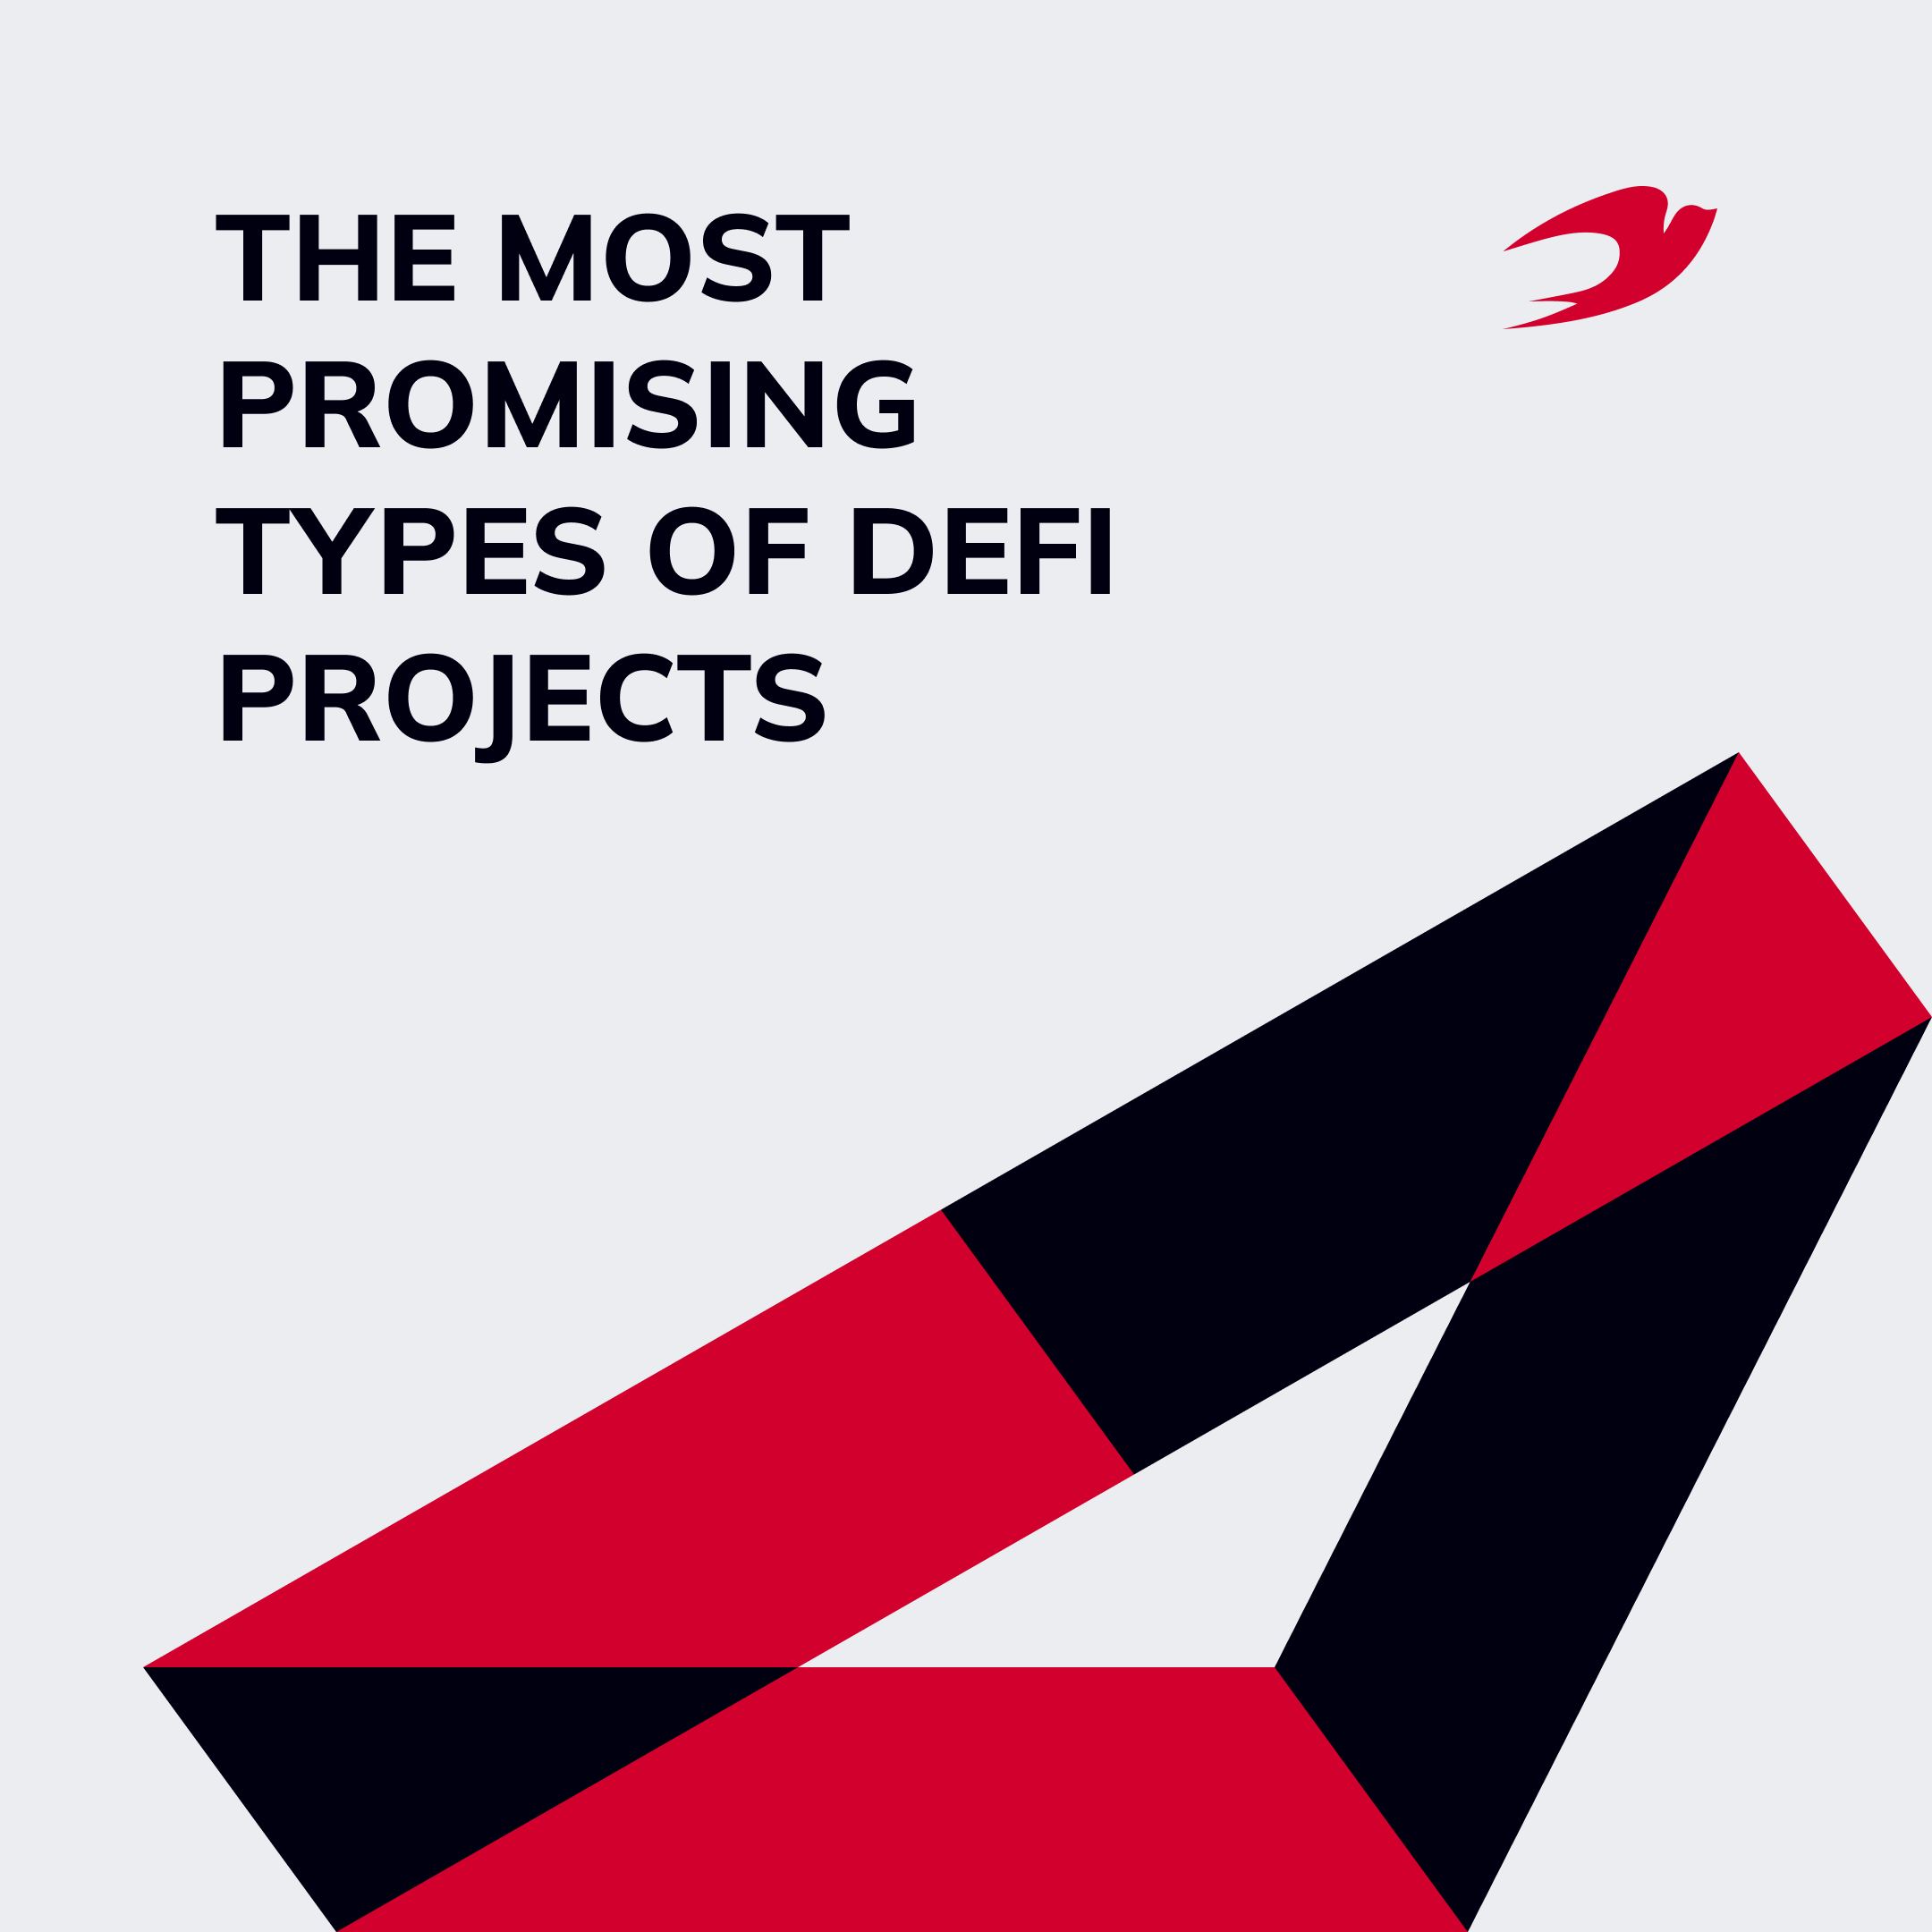 The most promising types of DeFi projects